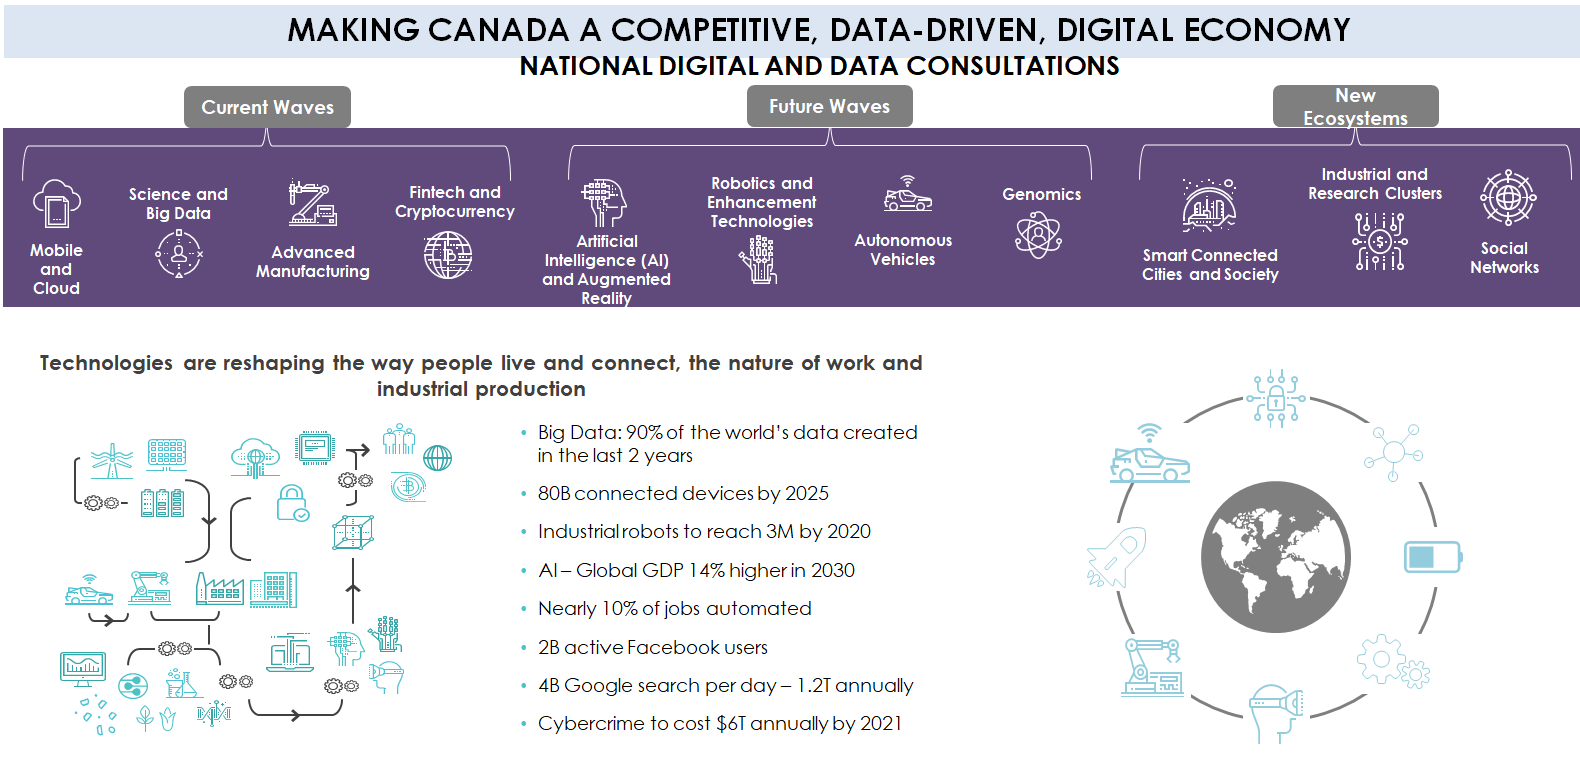 Image showing key themes from National Digital and Data Consultations including how technologies like big data and social networks are reshaping how people live.